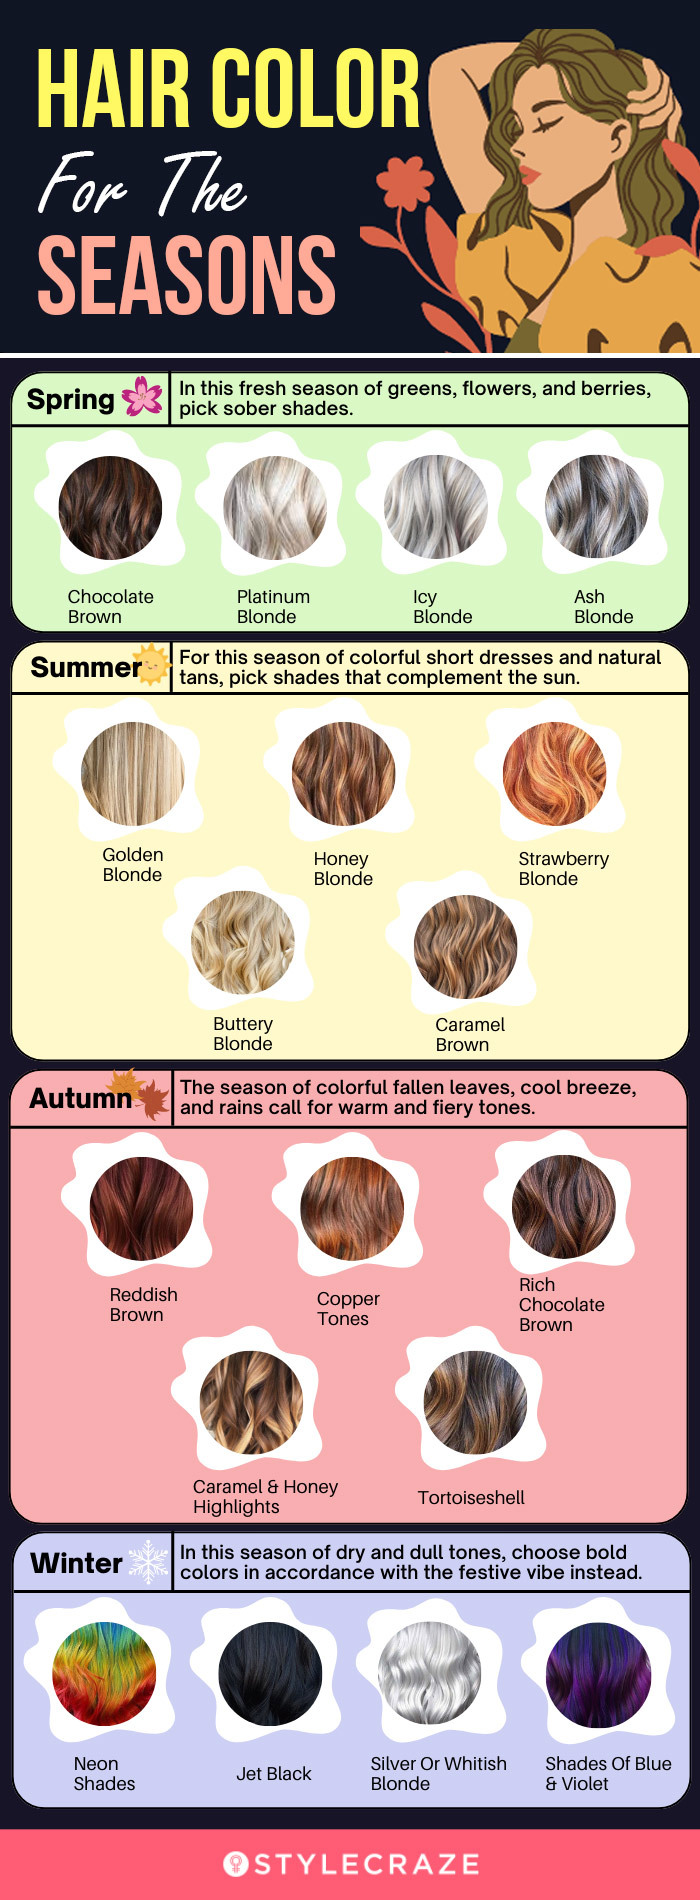 hair color for the seasons [infographic]